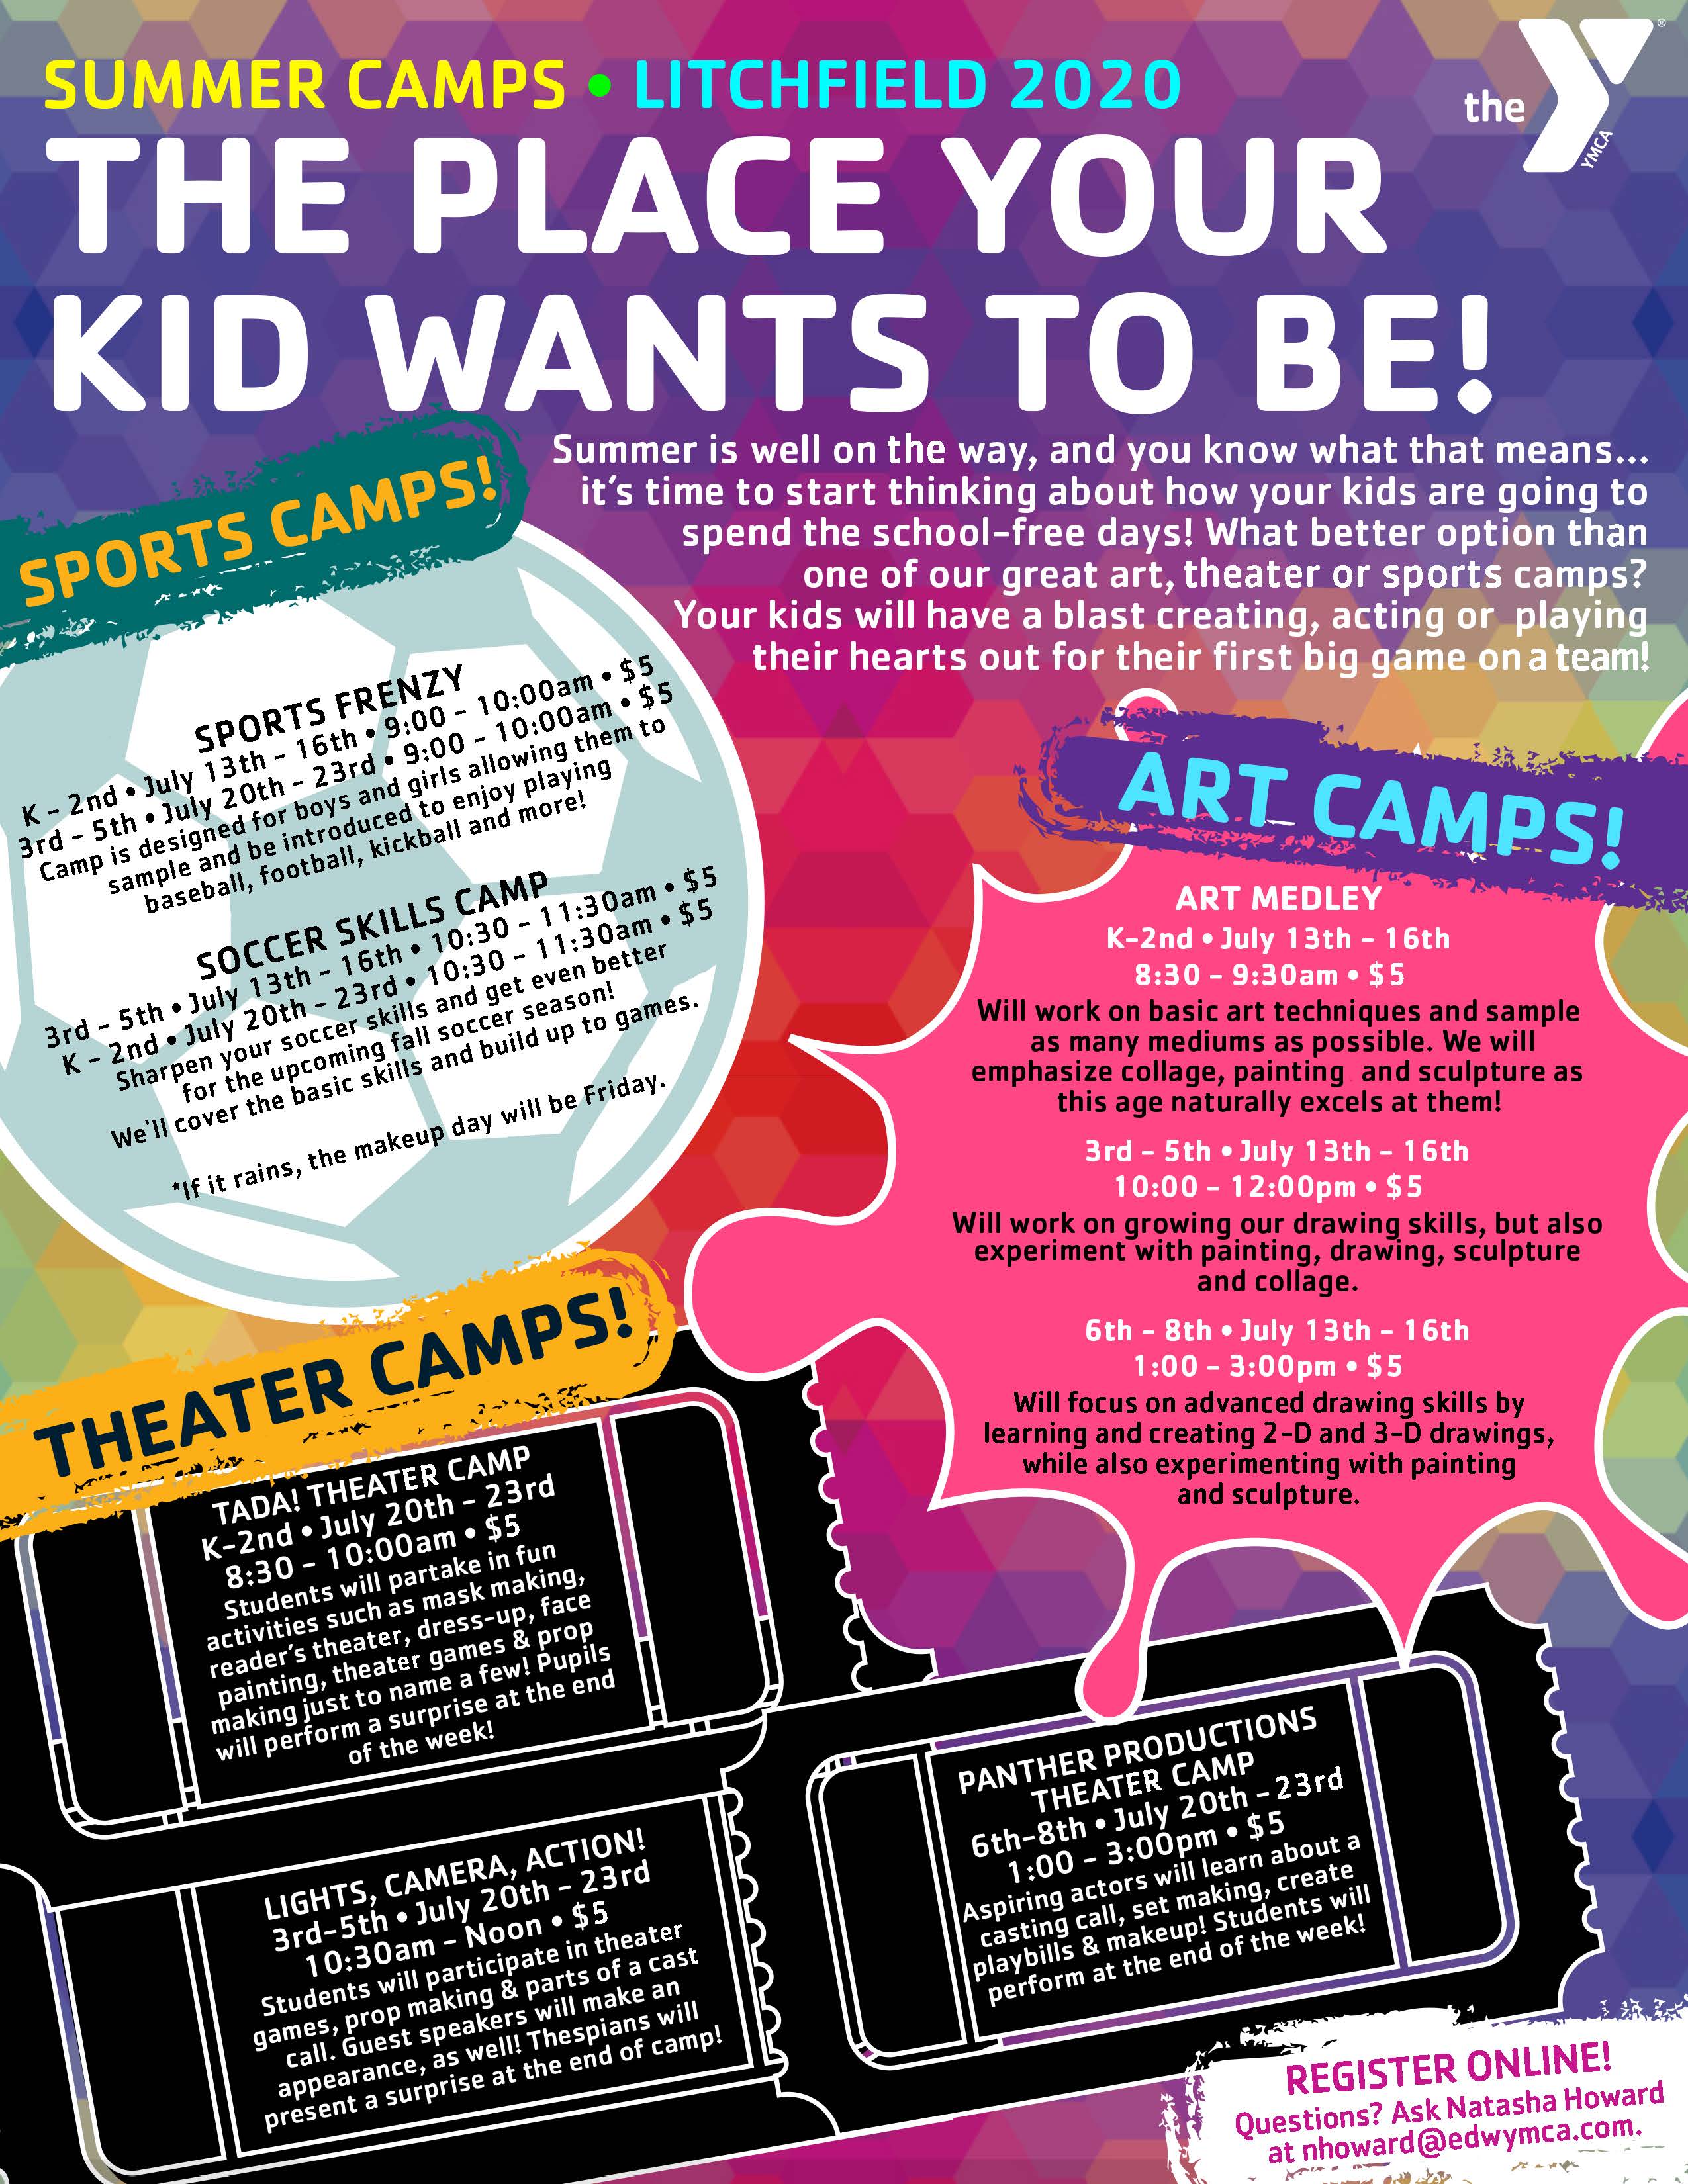 YMCA Summer Camps in Litchfield   The City of Litchfield